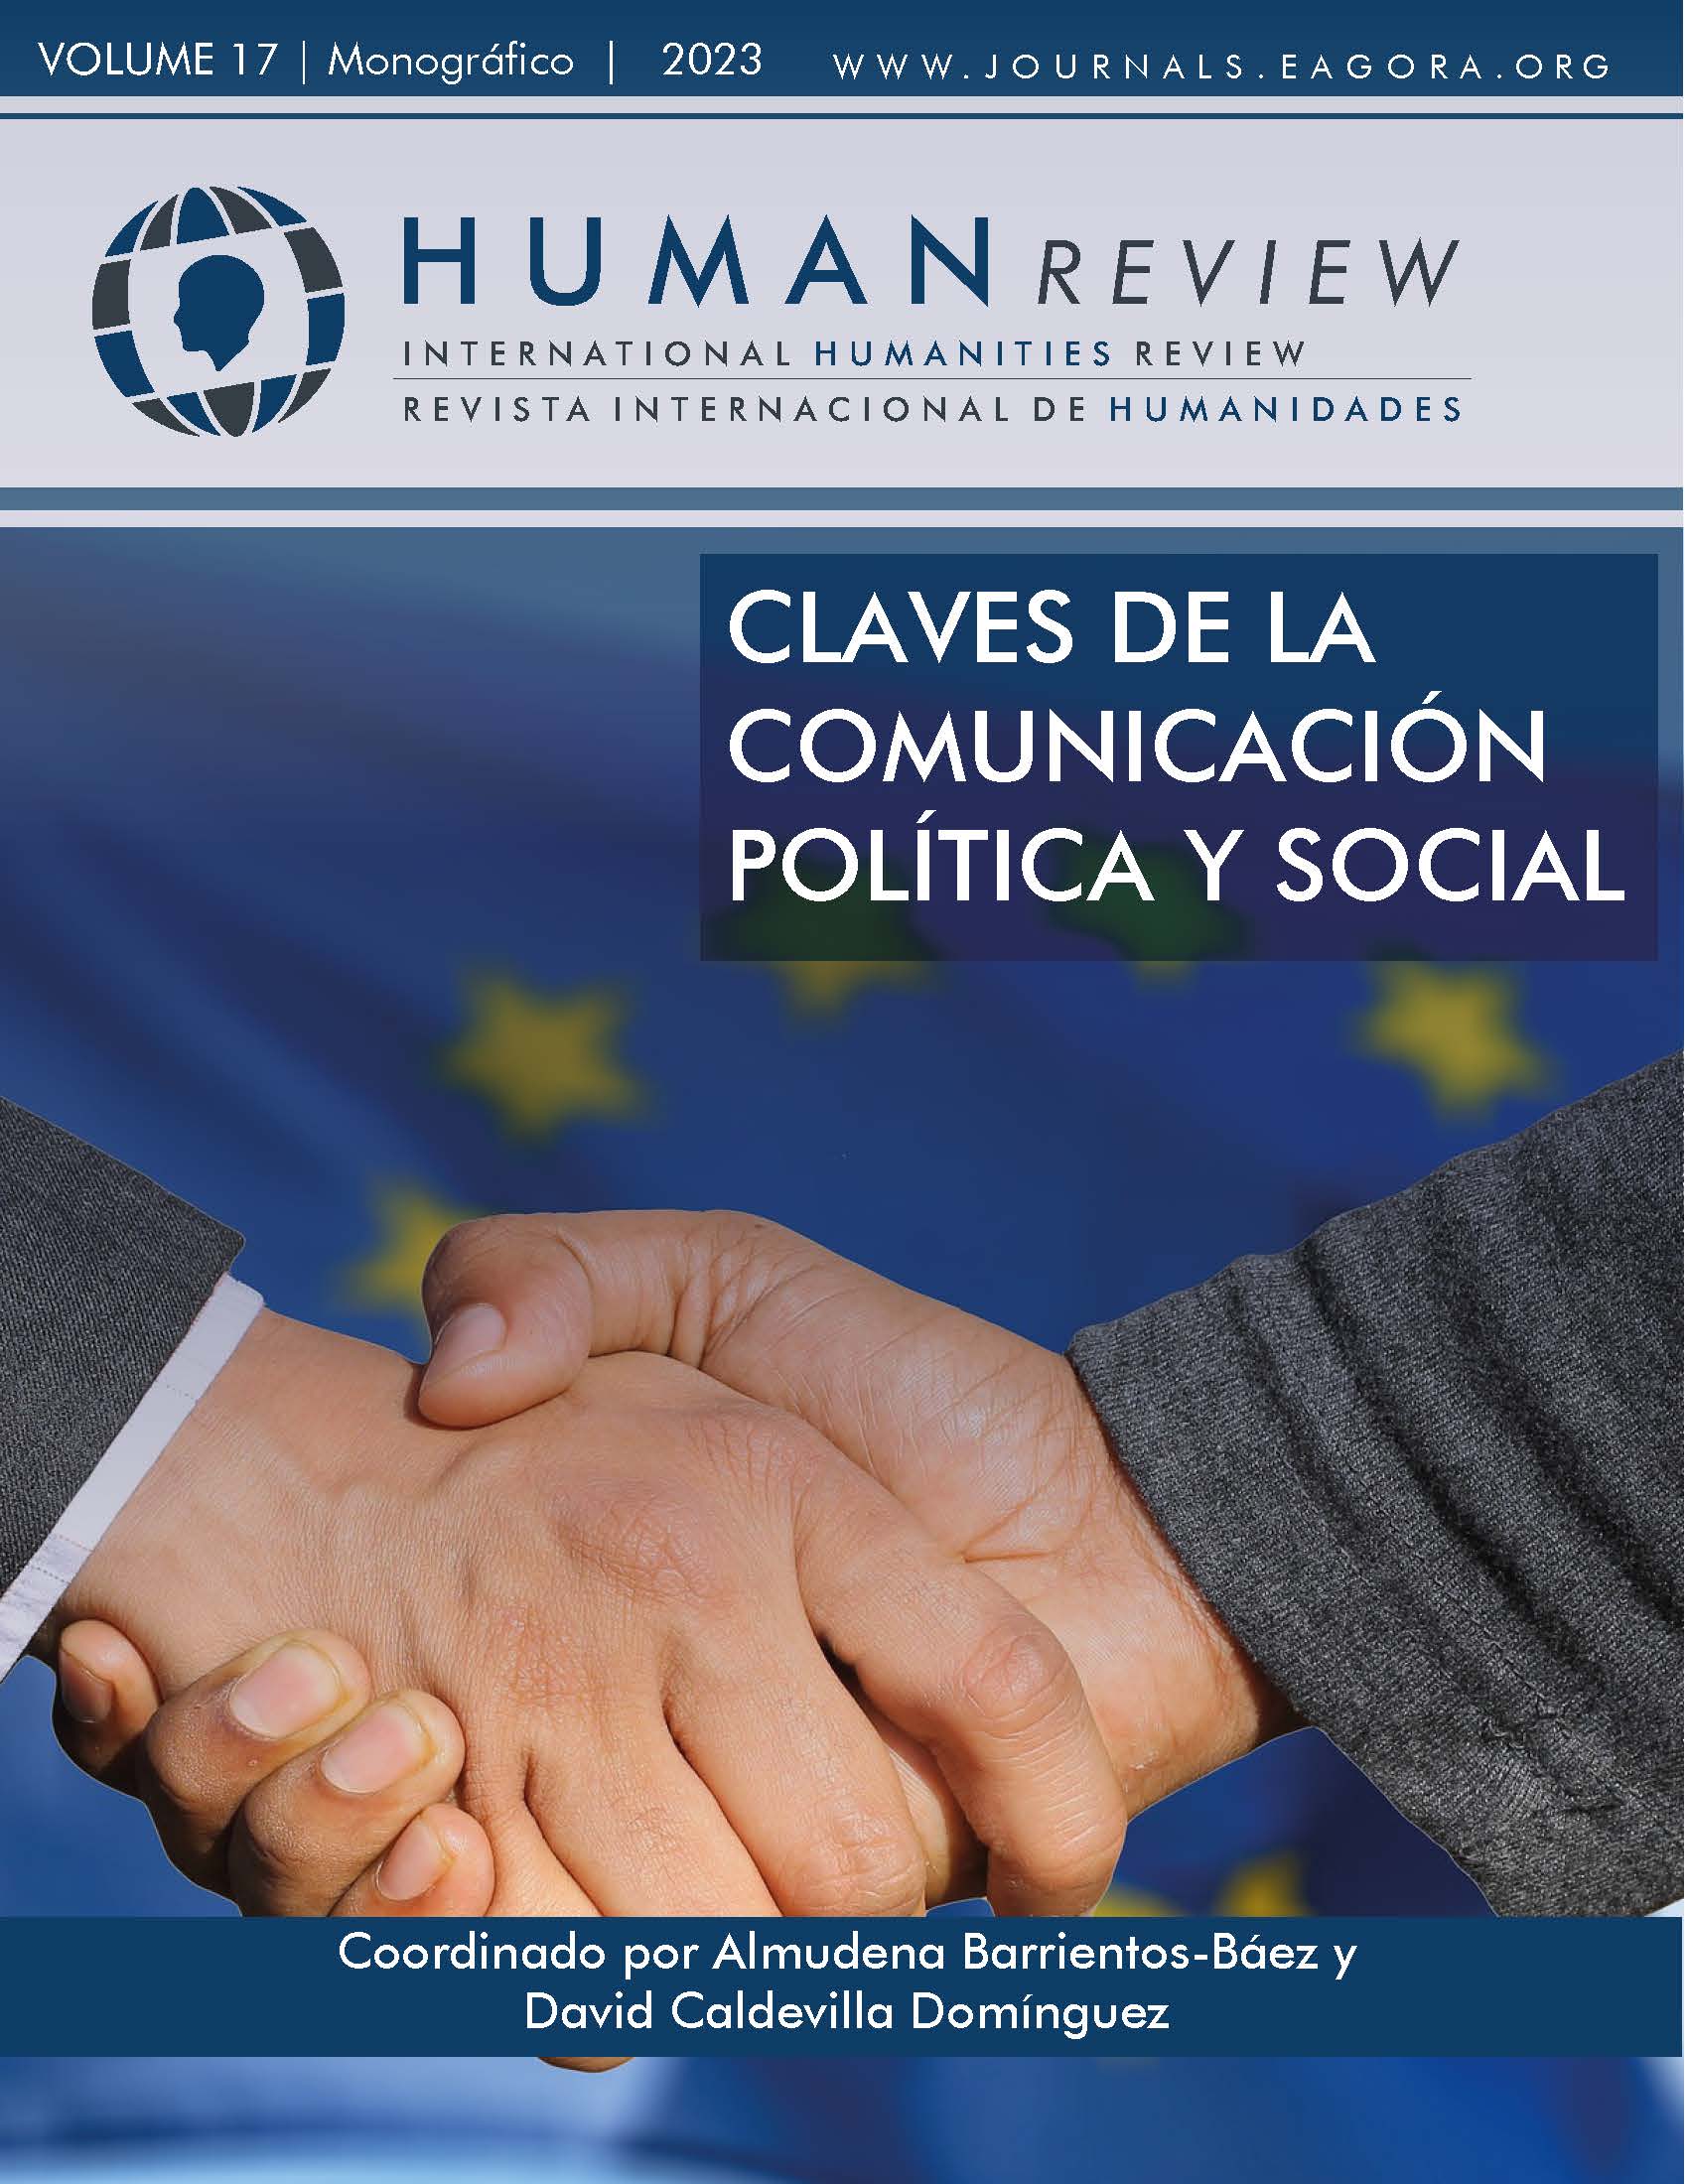 					View Vol. 17 No. 6 (2023): Monograph: "Keys to political and social communication"
				